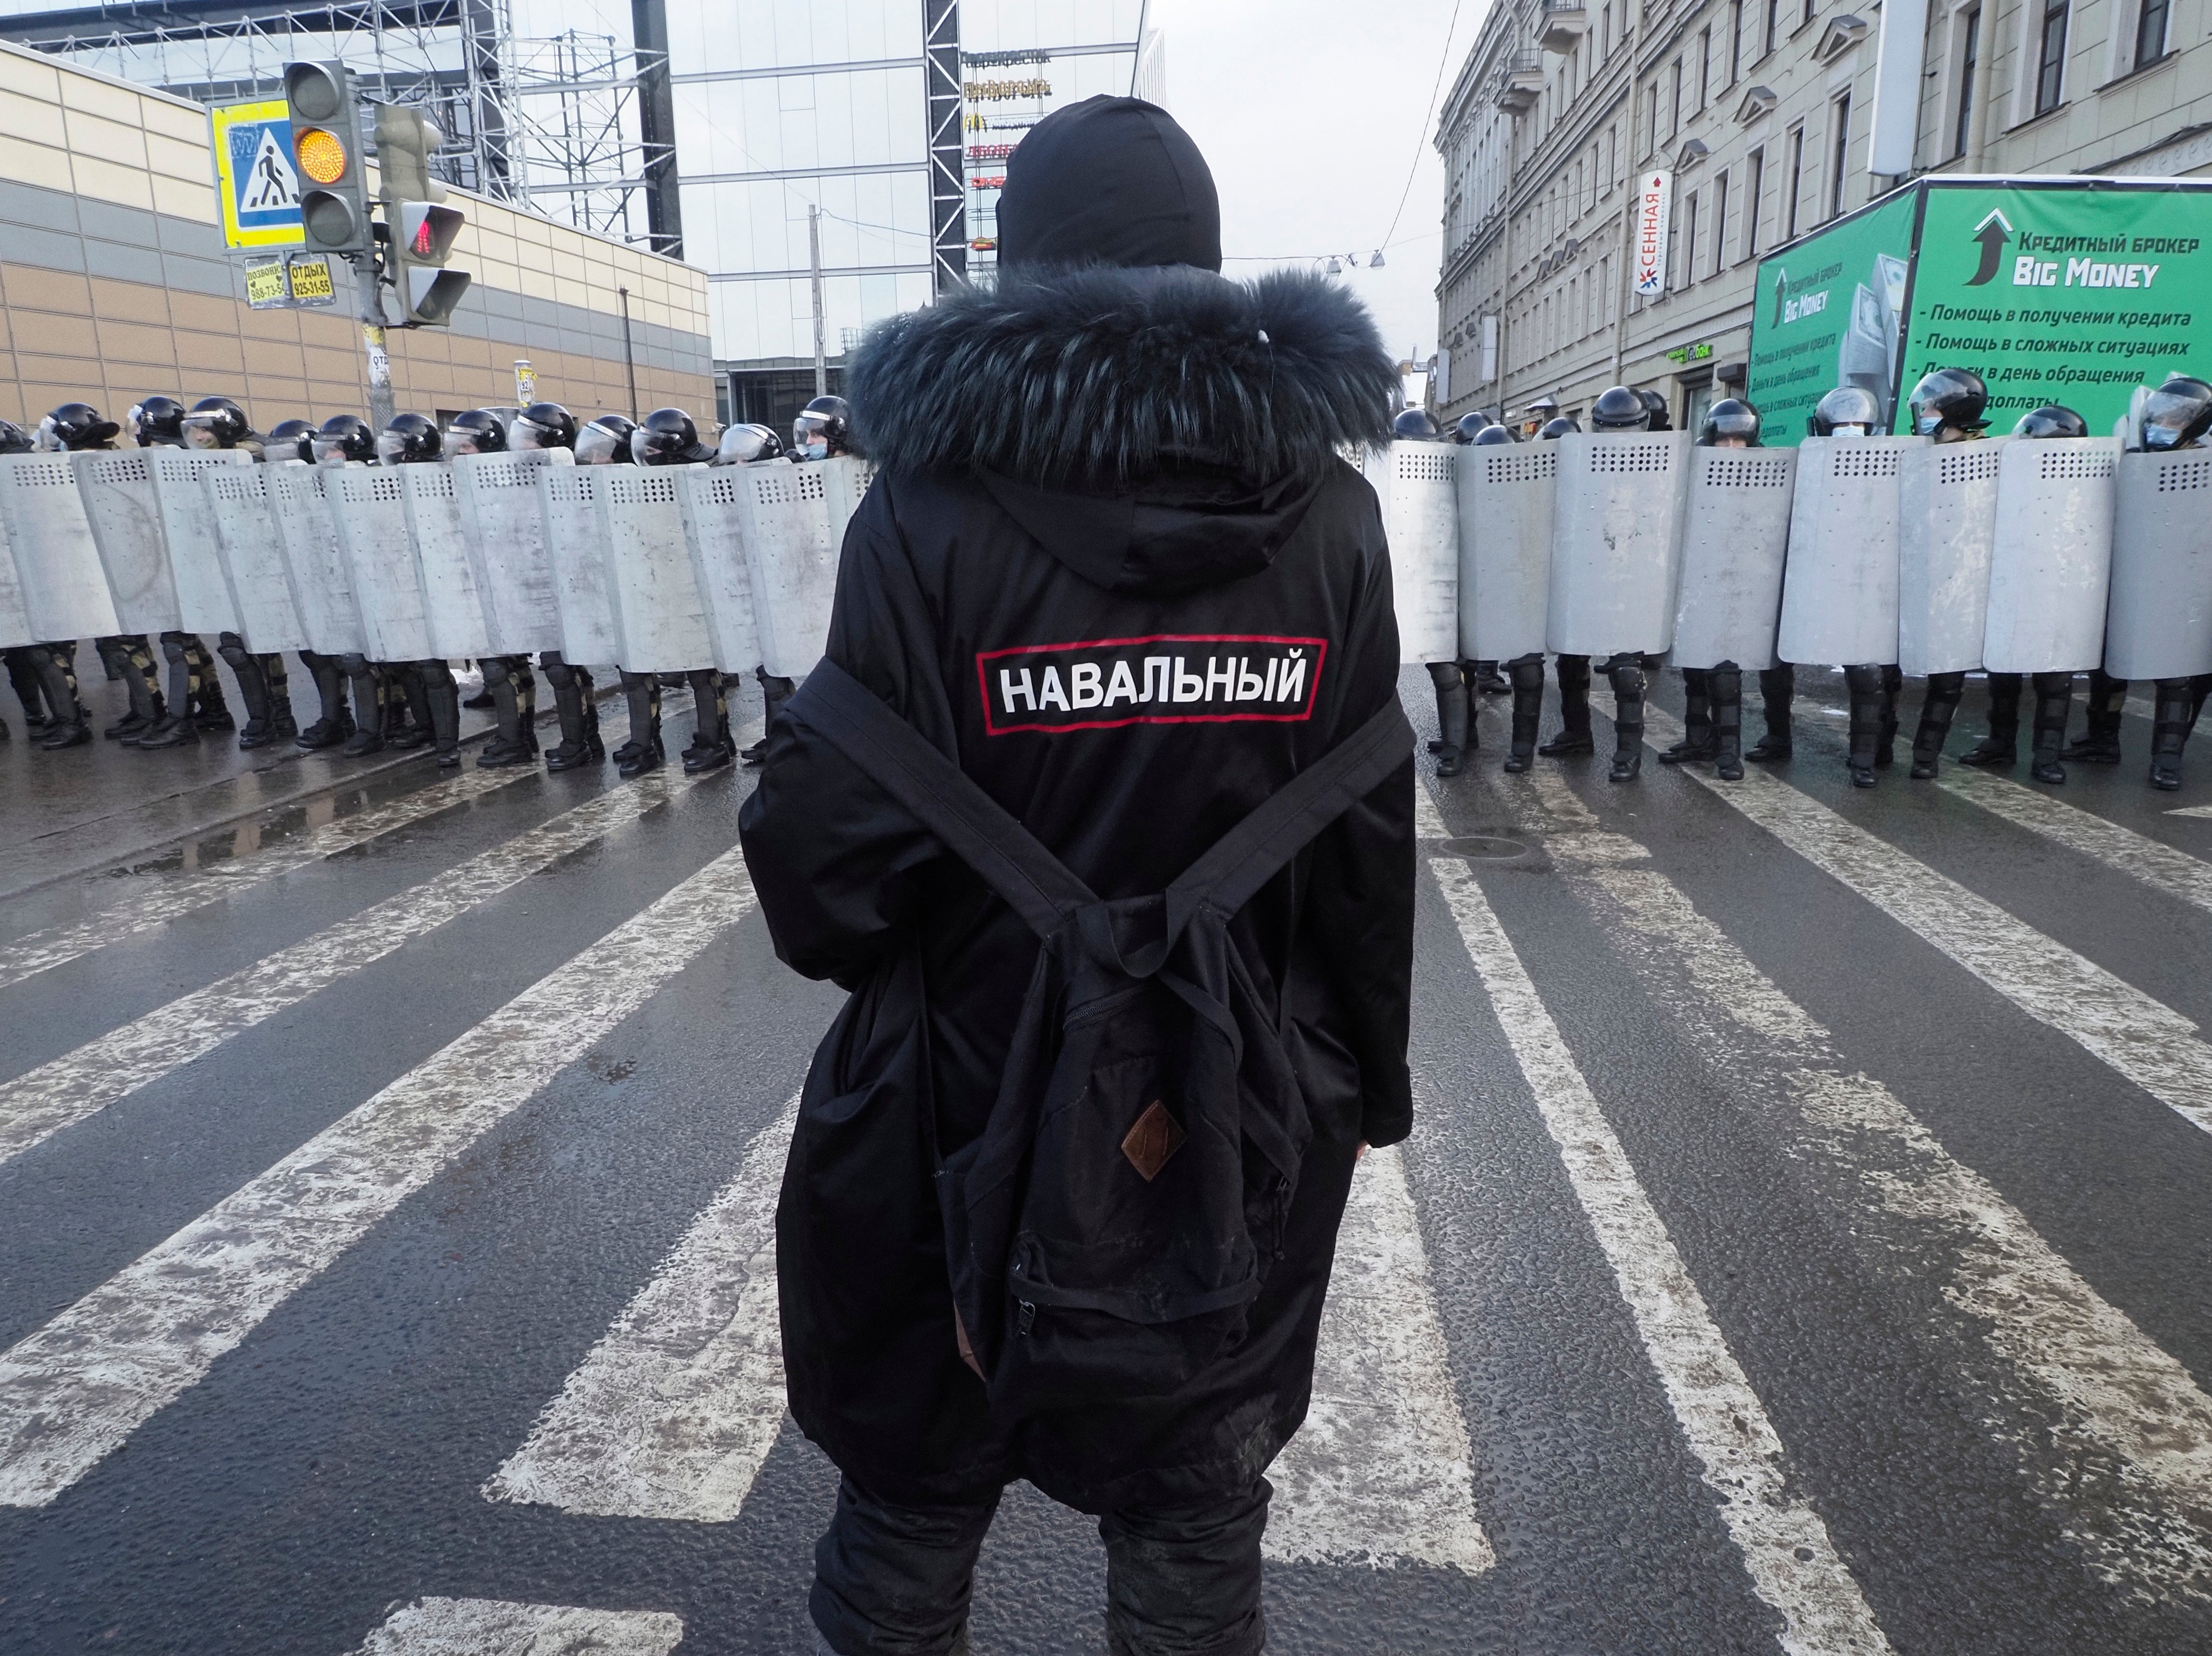 A man with a sign ‘Navalny’ on his back stands in front of riot policemen blocking the way to protester during a protest against the jailing of opposition leader Alexei Navalny in St. Petersburg